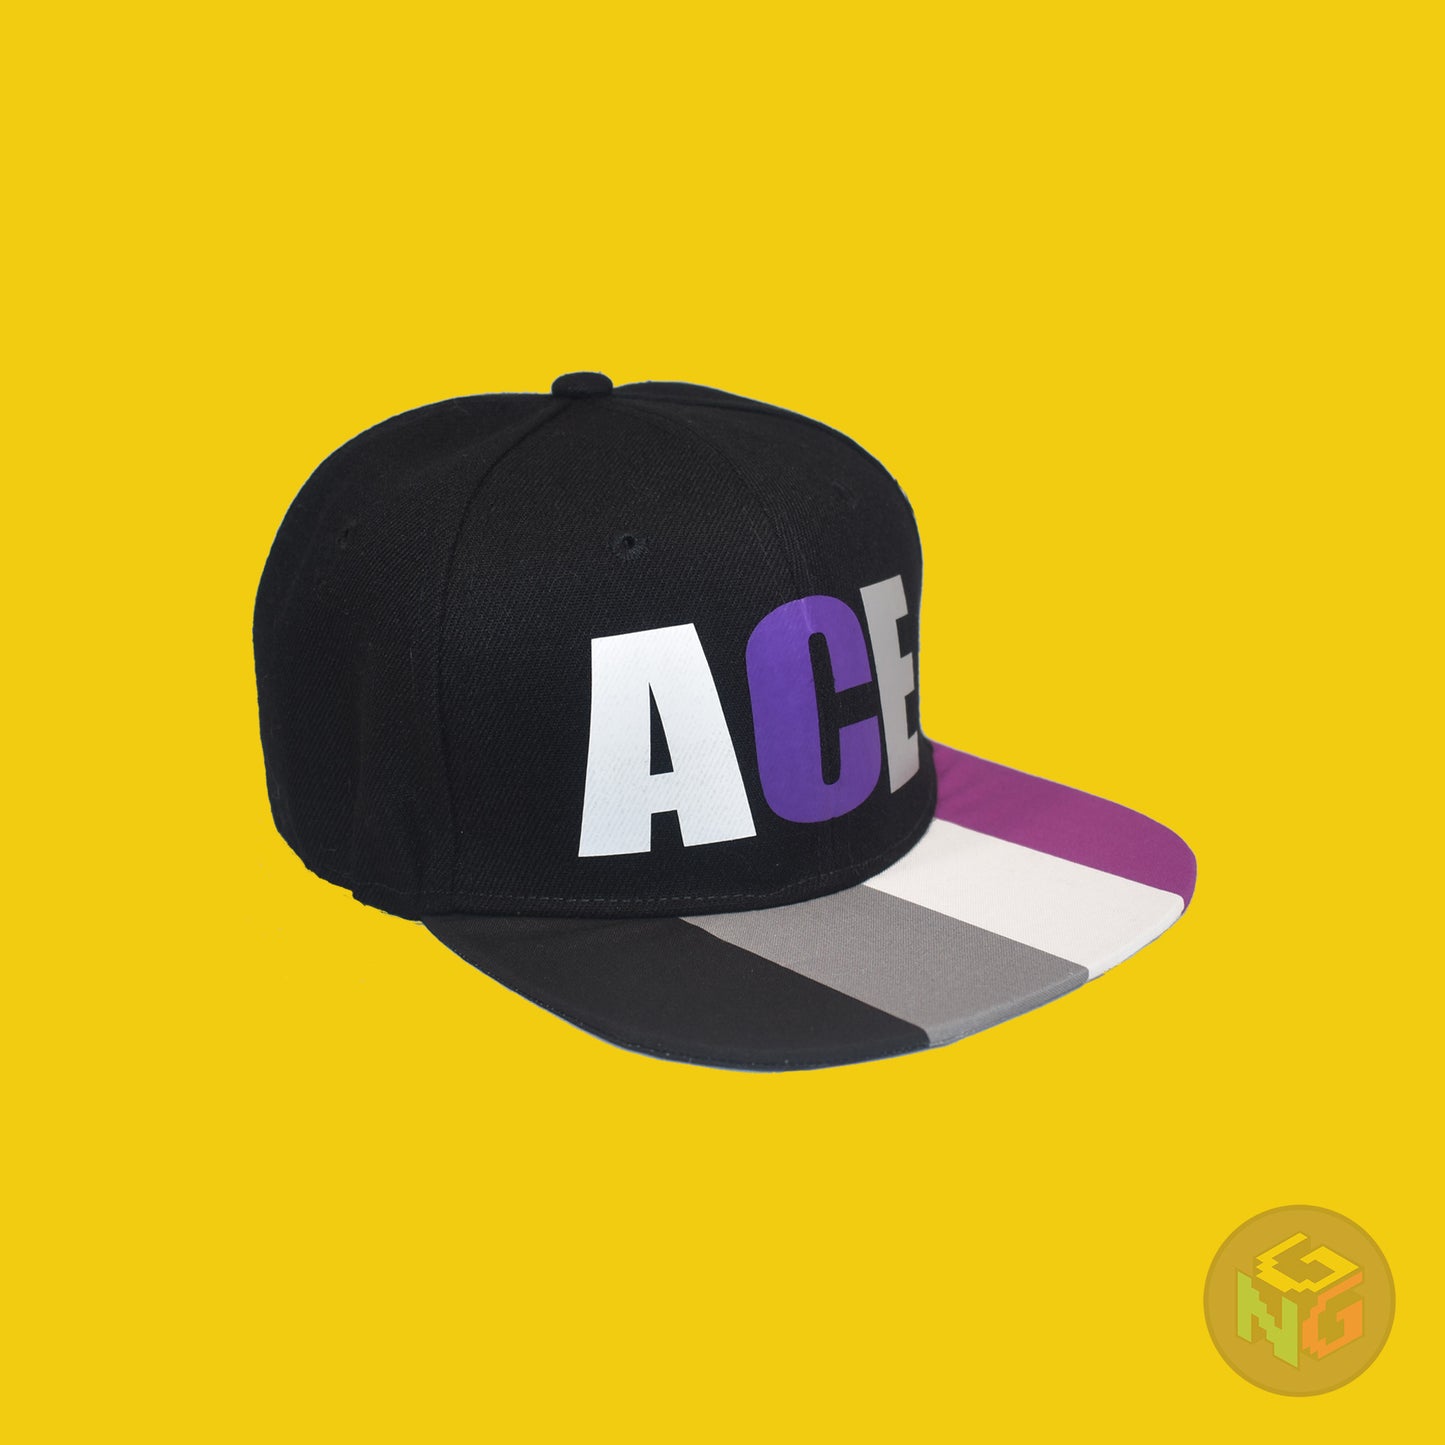 Black flat bill snapback hat. The brim has the asexual pride flag on both sides and the front of the hat has the word “ACE” in white, purple, and grey. Front right view